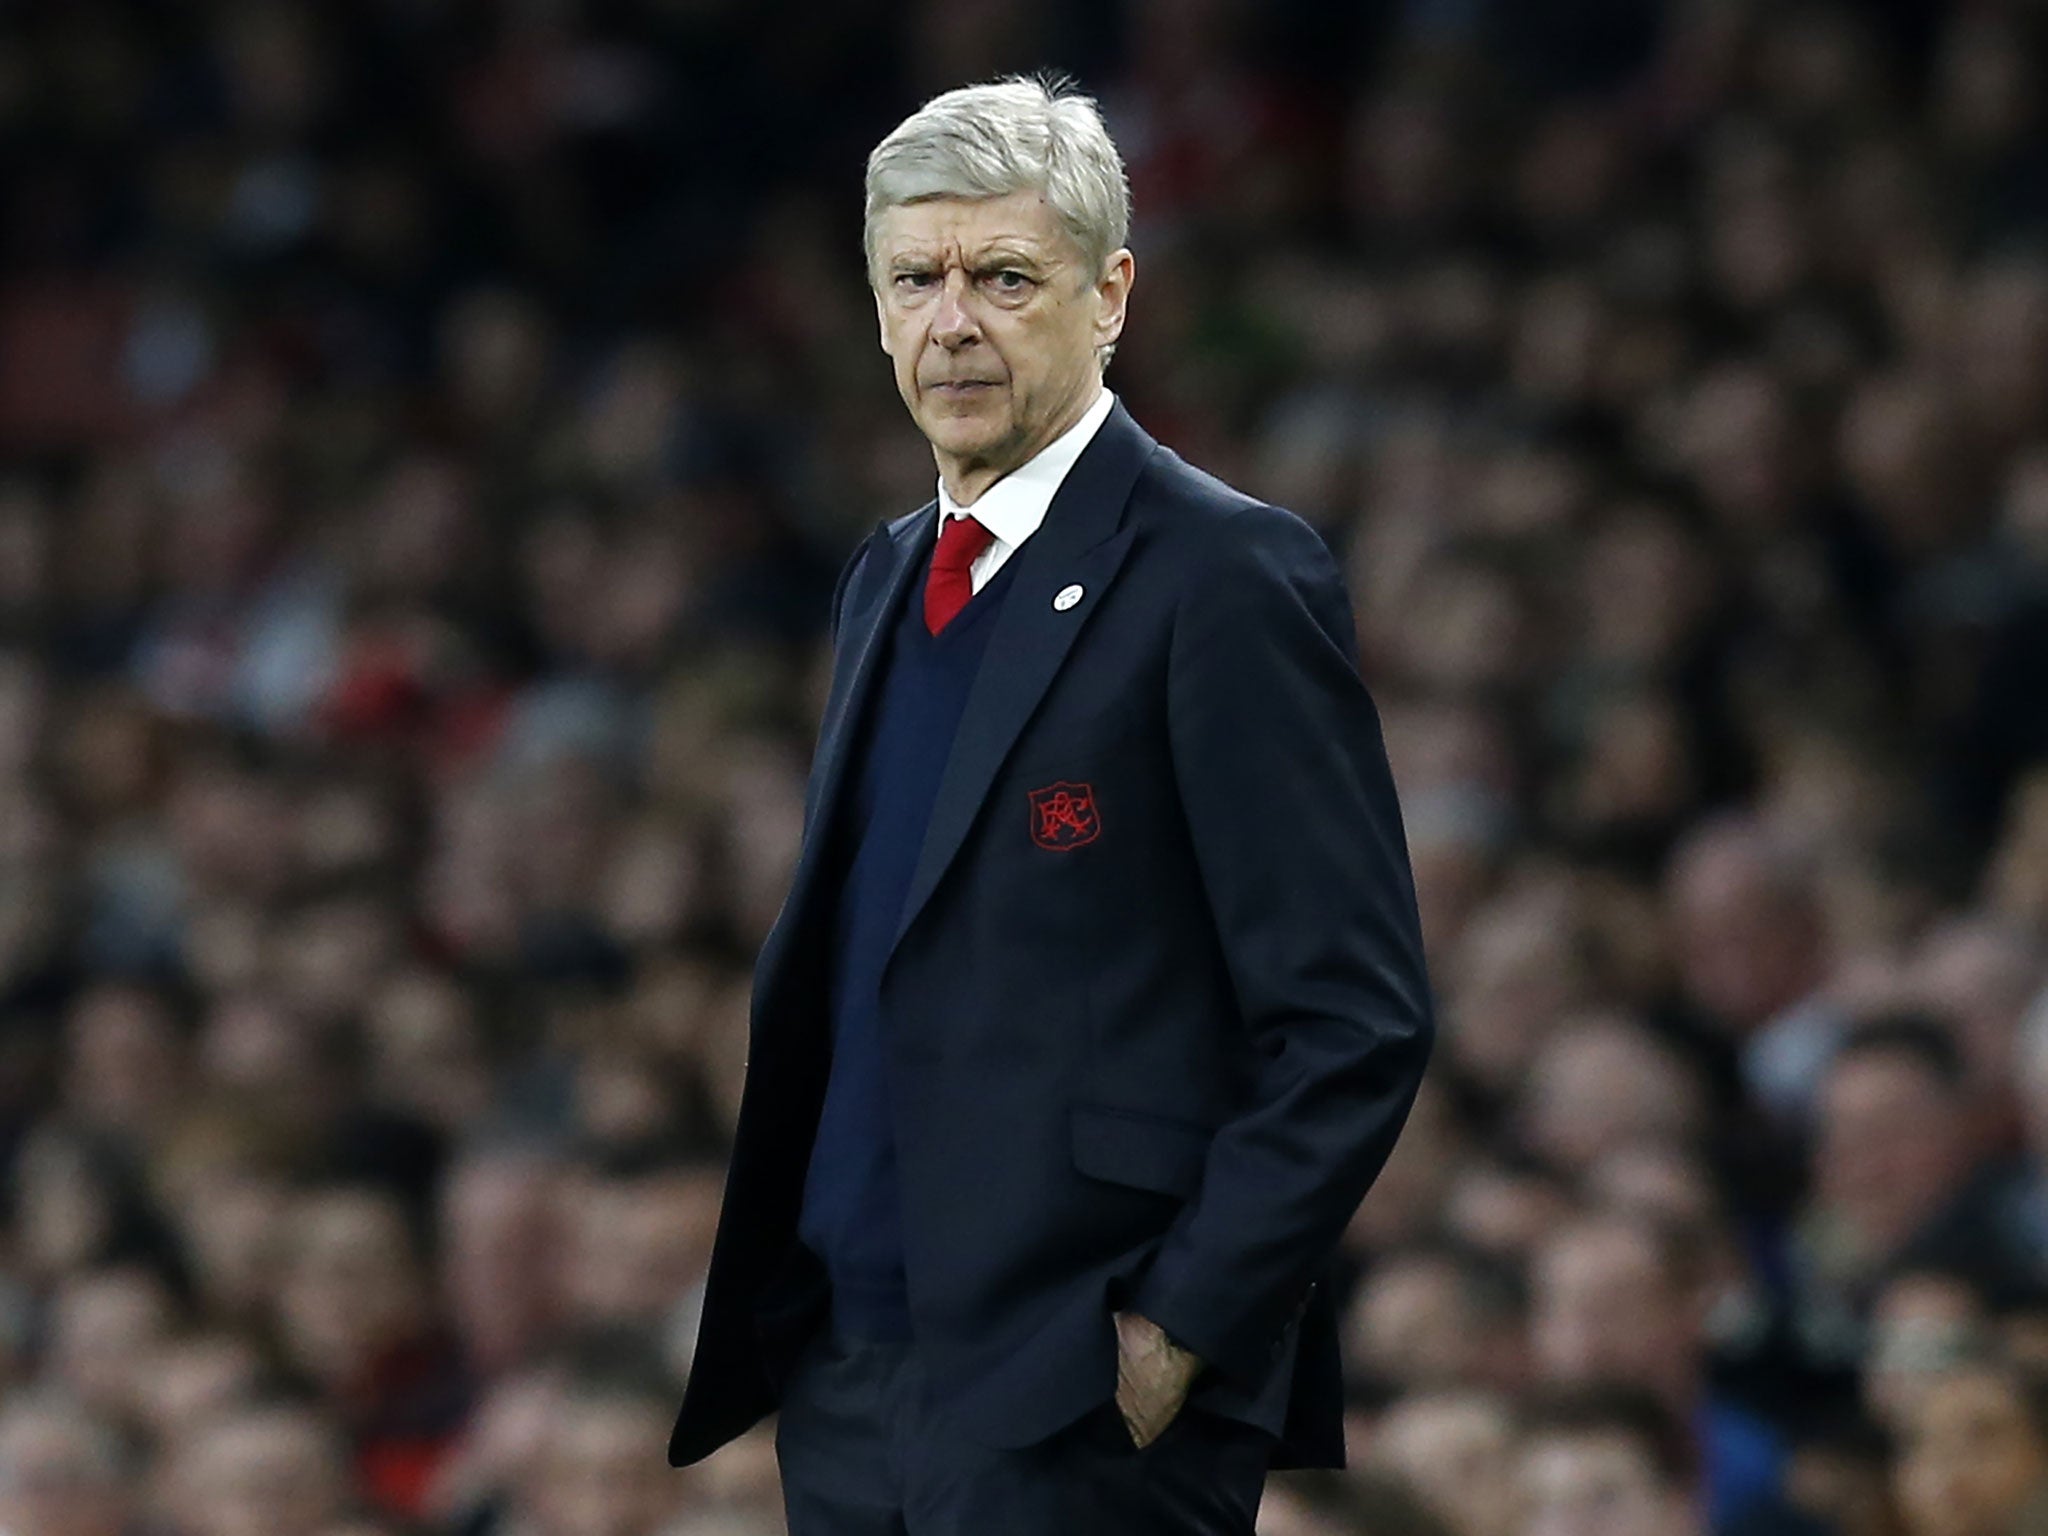 Arsene Wenger has not yet decided if he will leave Arsenal at the end of the season